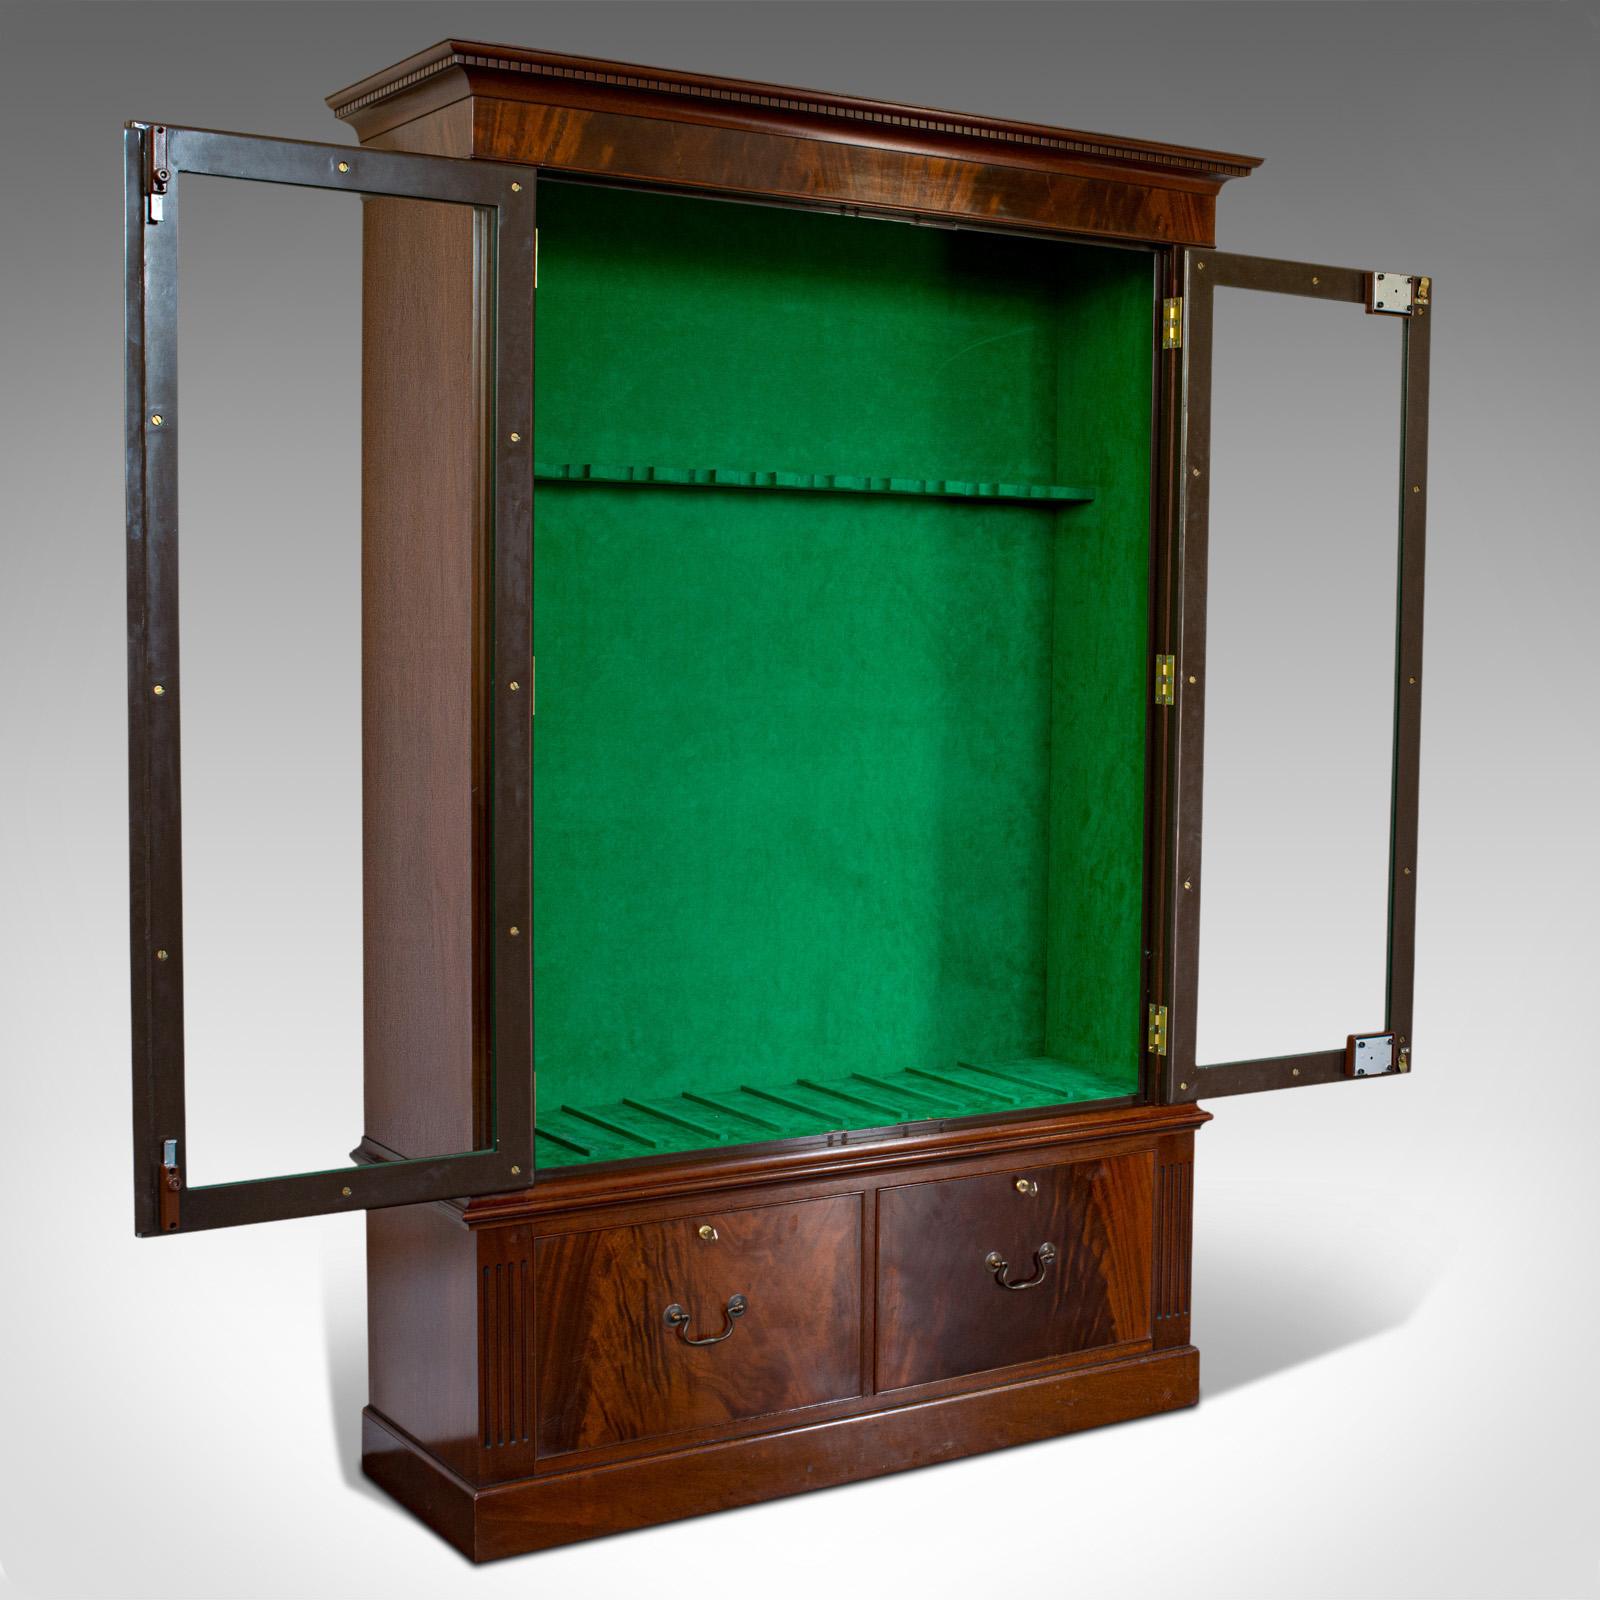 This is a vintage secure display cabinet. An English, mahogany stronghold gun rack, by Asprey of London, dating to the late 20th century.

Superior strength, classically inspired showcase
Displays a desirable aged patina
Select mahogany shows